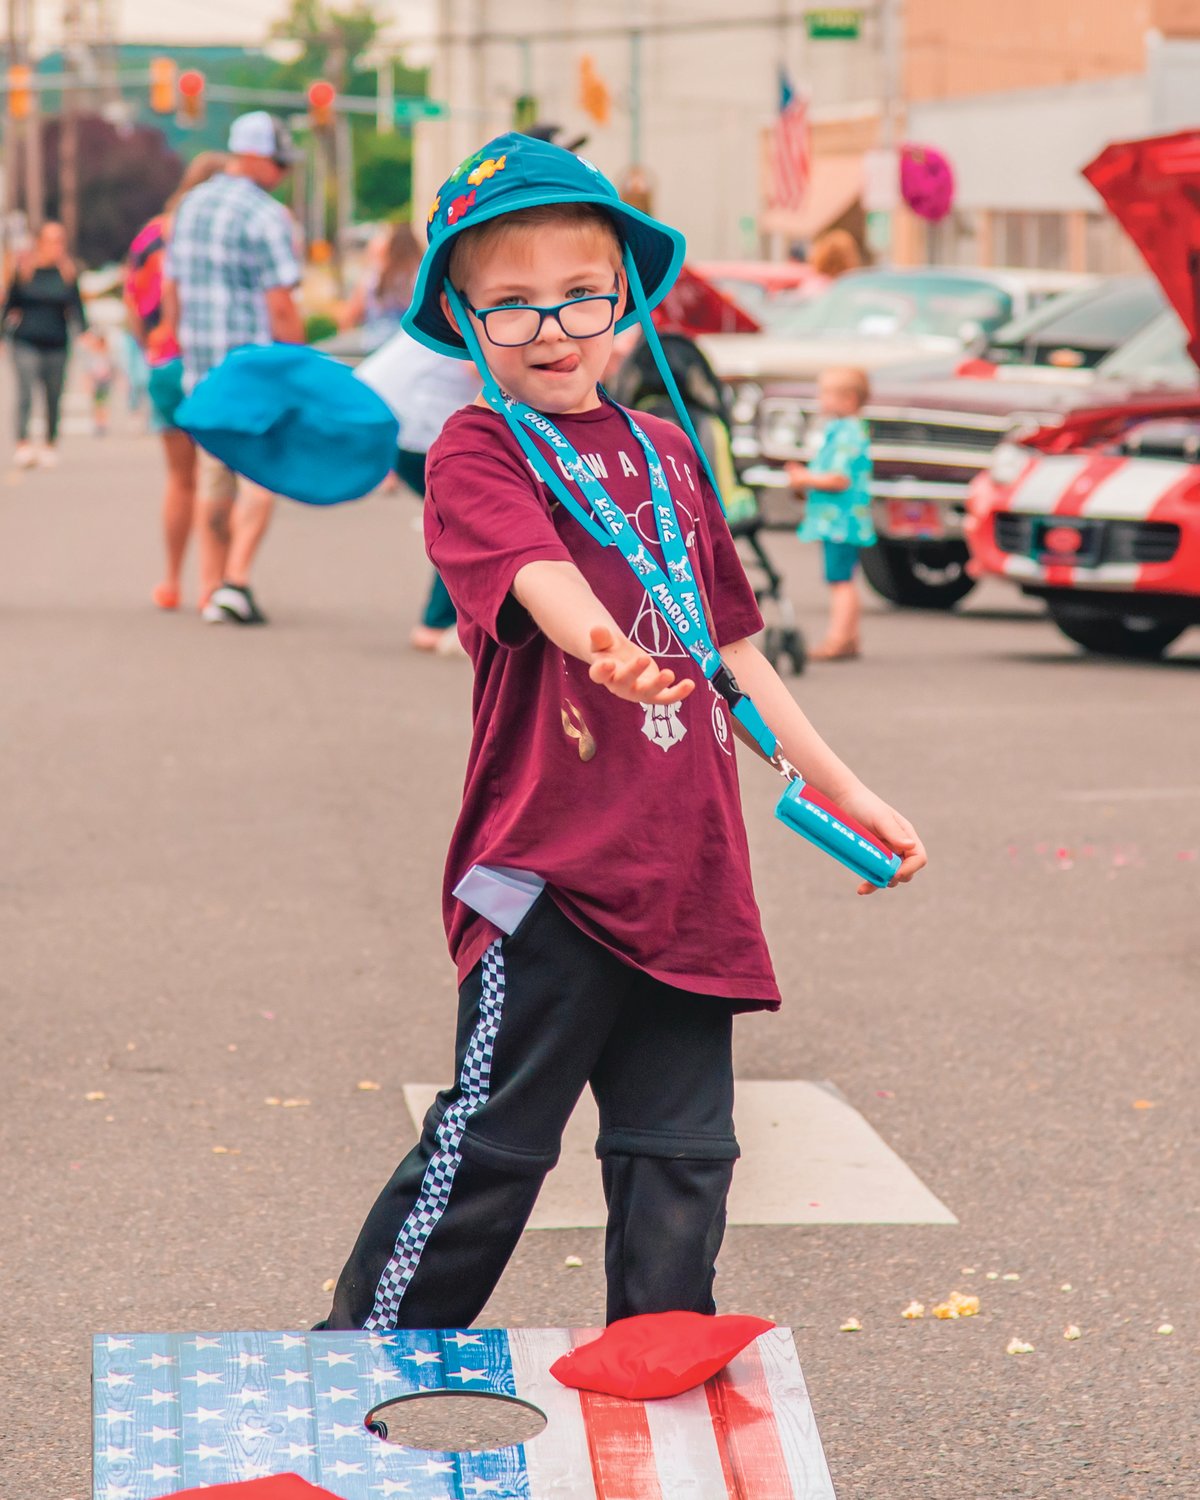 Wilder Jackson, 7, plays cornhole in the middle of NW Chehalis Avenue on Saturday during ChehalisFest.